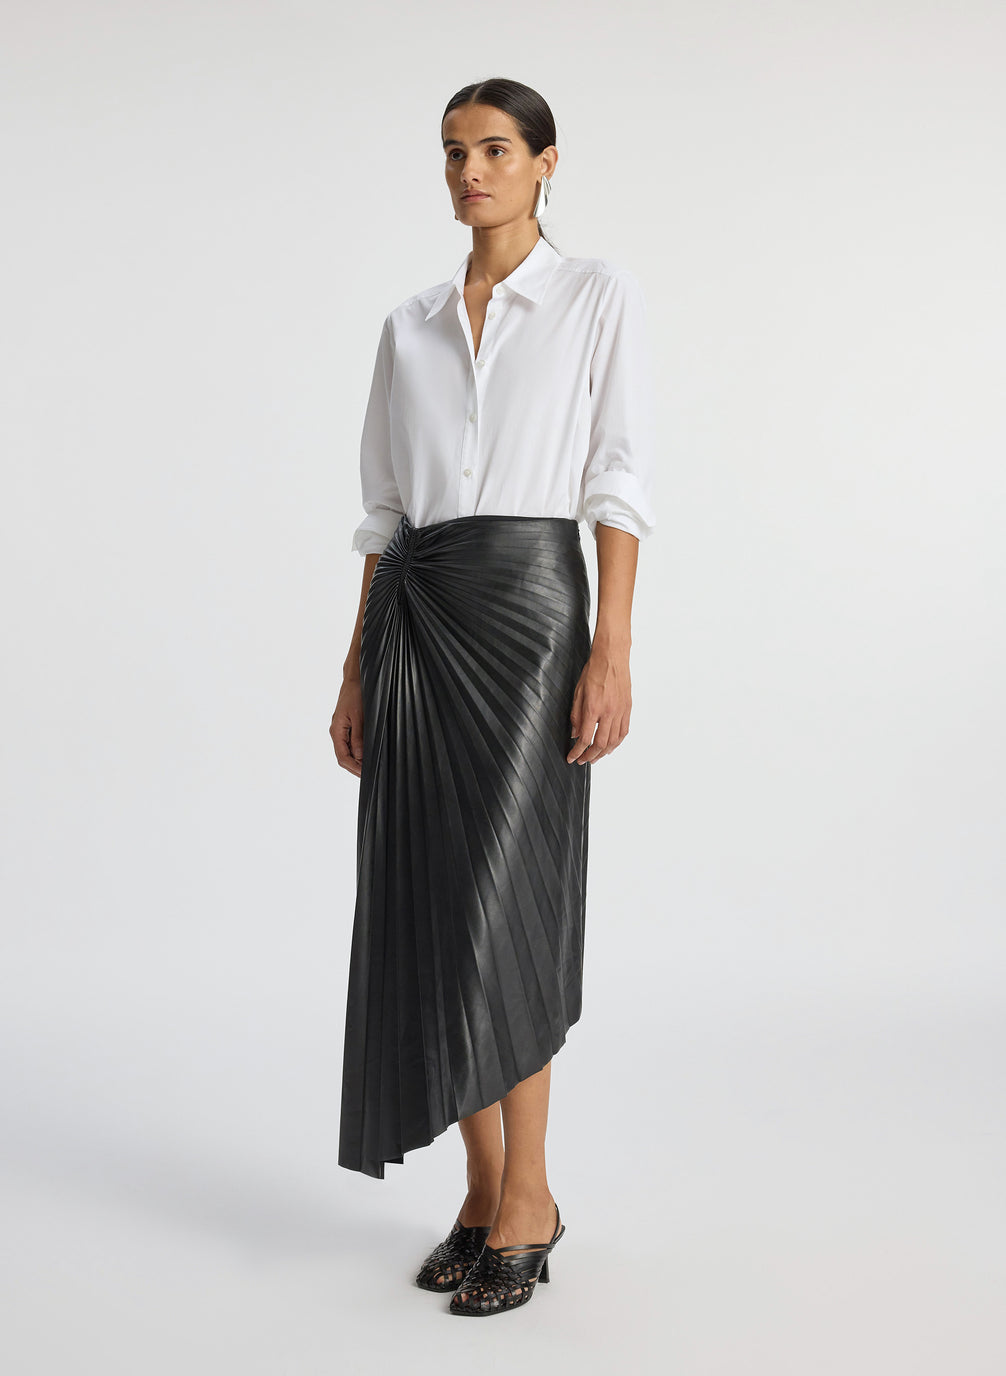 side view of woman wearing white button down top and black pleated vegan leather skirt